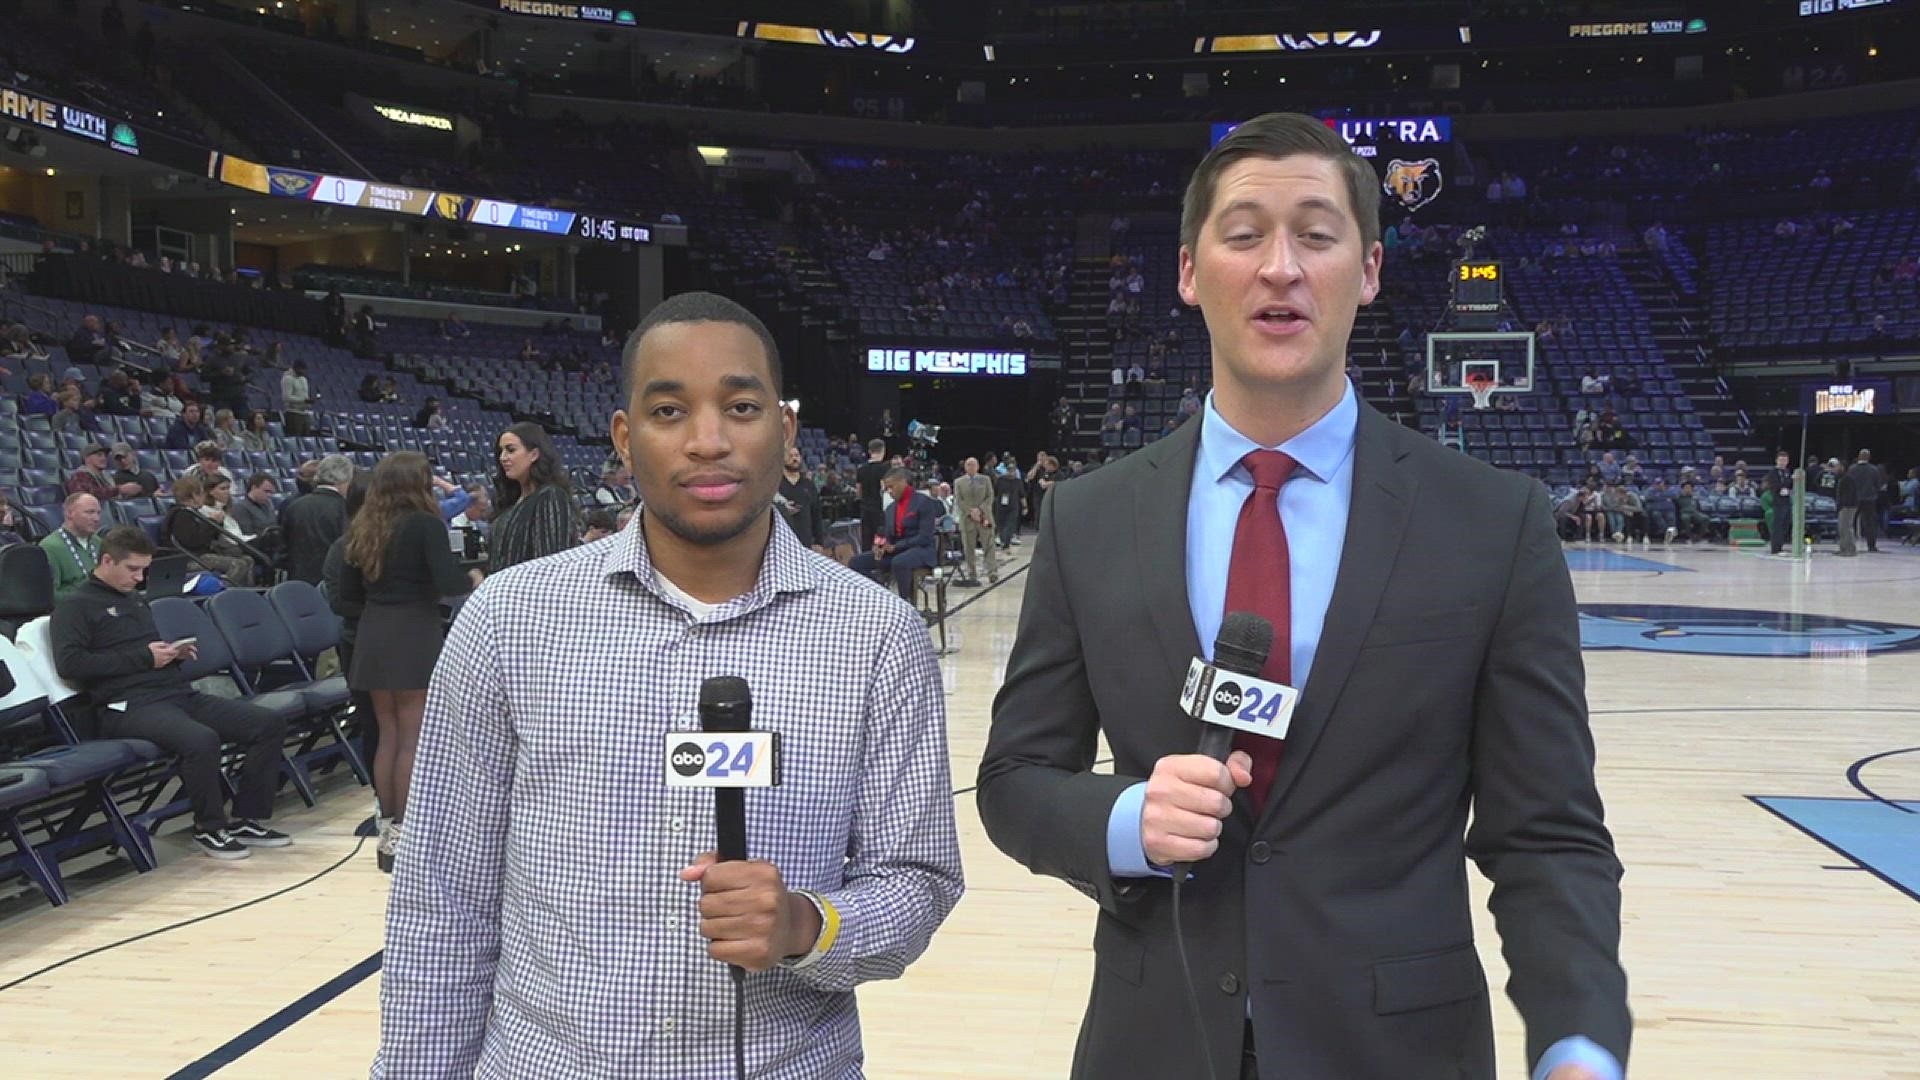 Clayton Collier and Damichael Cole preview the Grizzlies matchup with the Pelicans